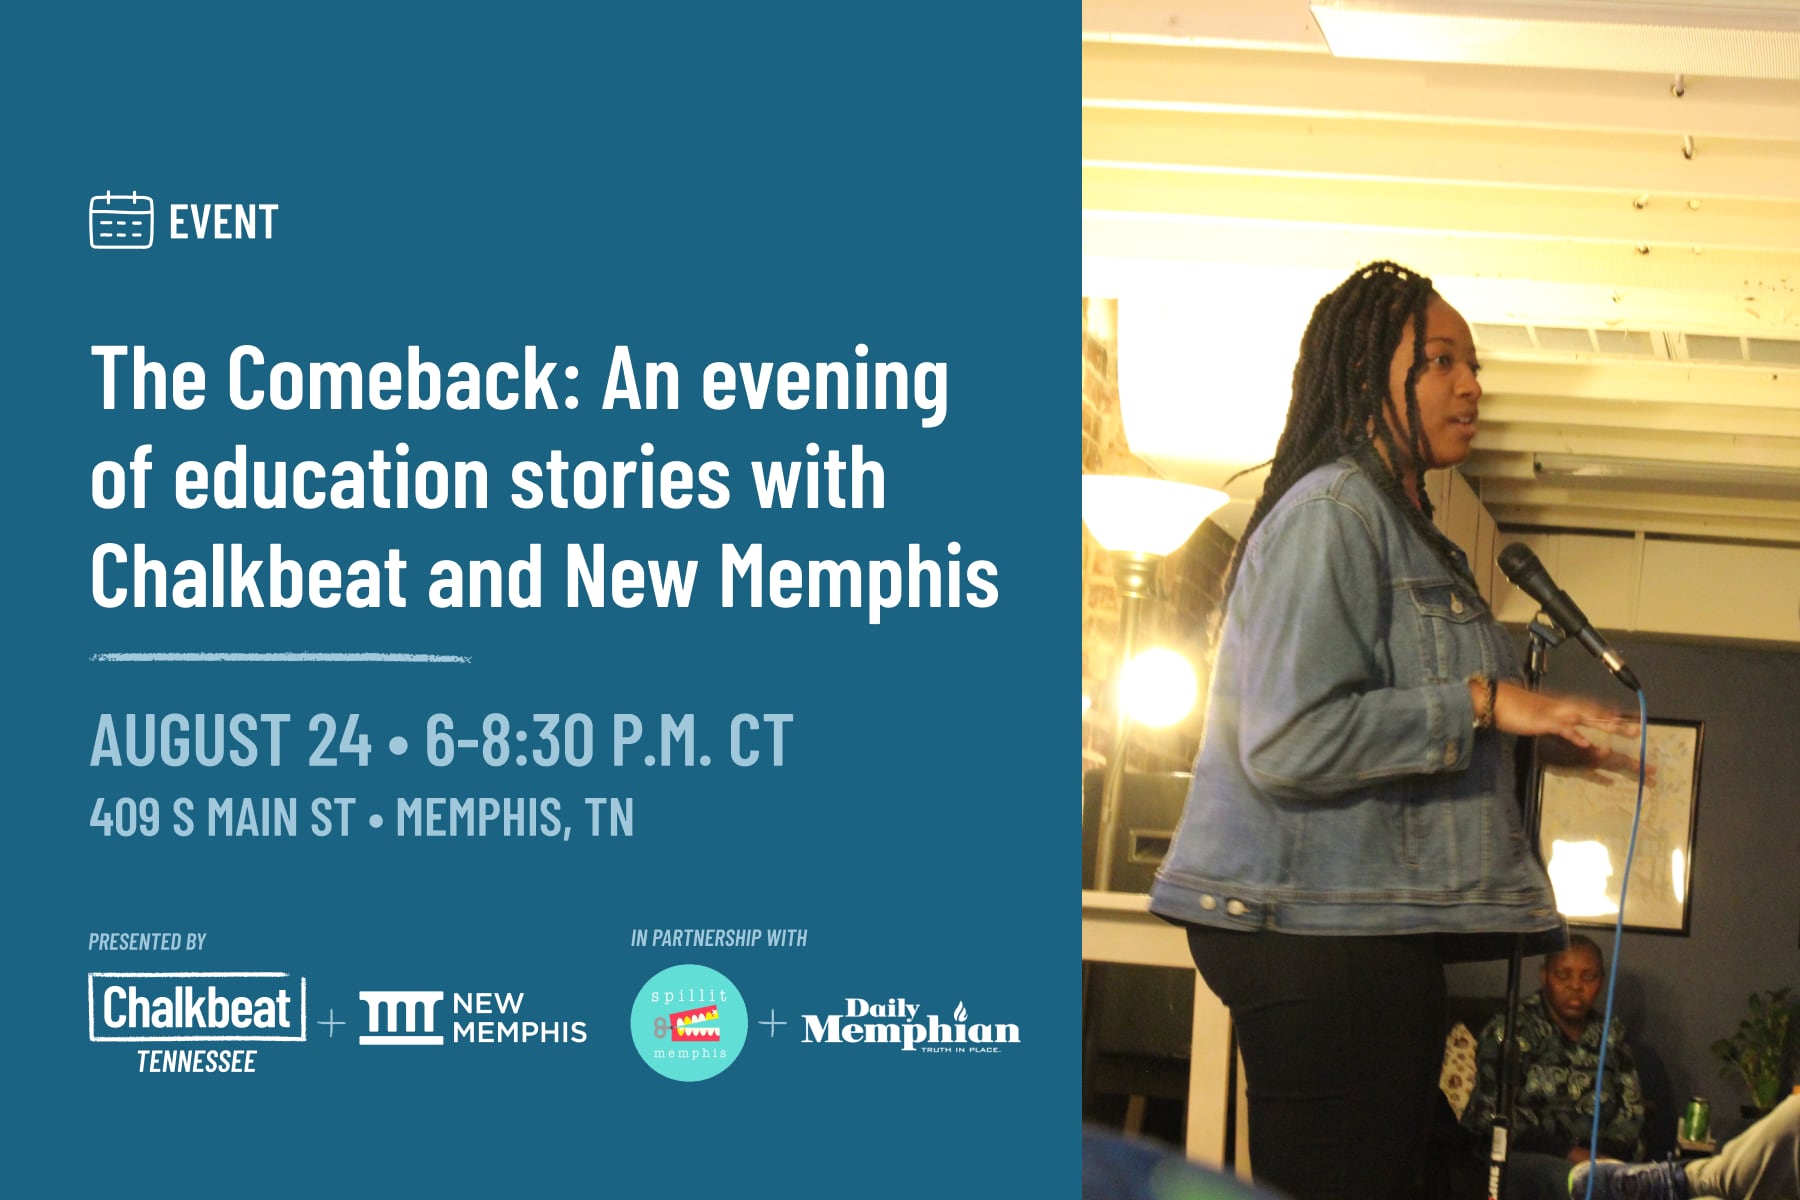 The event title, “The Comeback: An evening of stories from Memphis educators and students “ is displayed in white text against a blue backdrop. Next to the title is a photo of a storyteller from a previous event. 